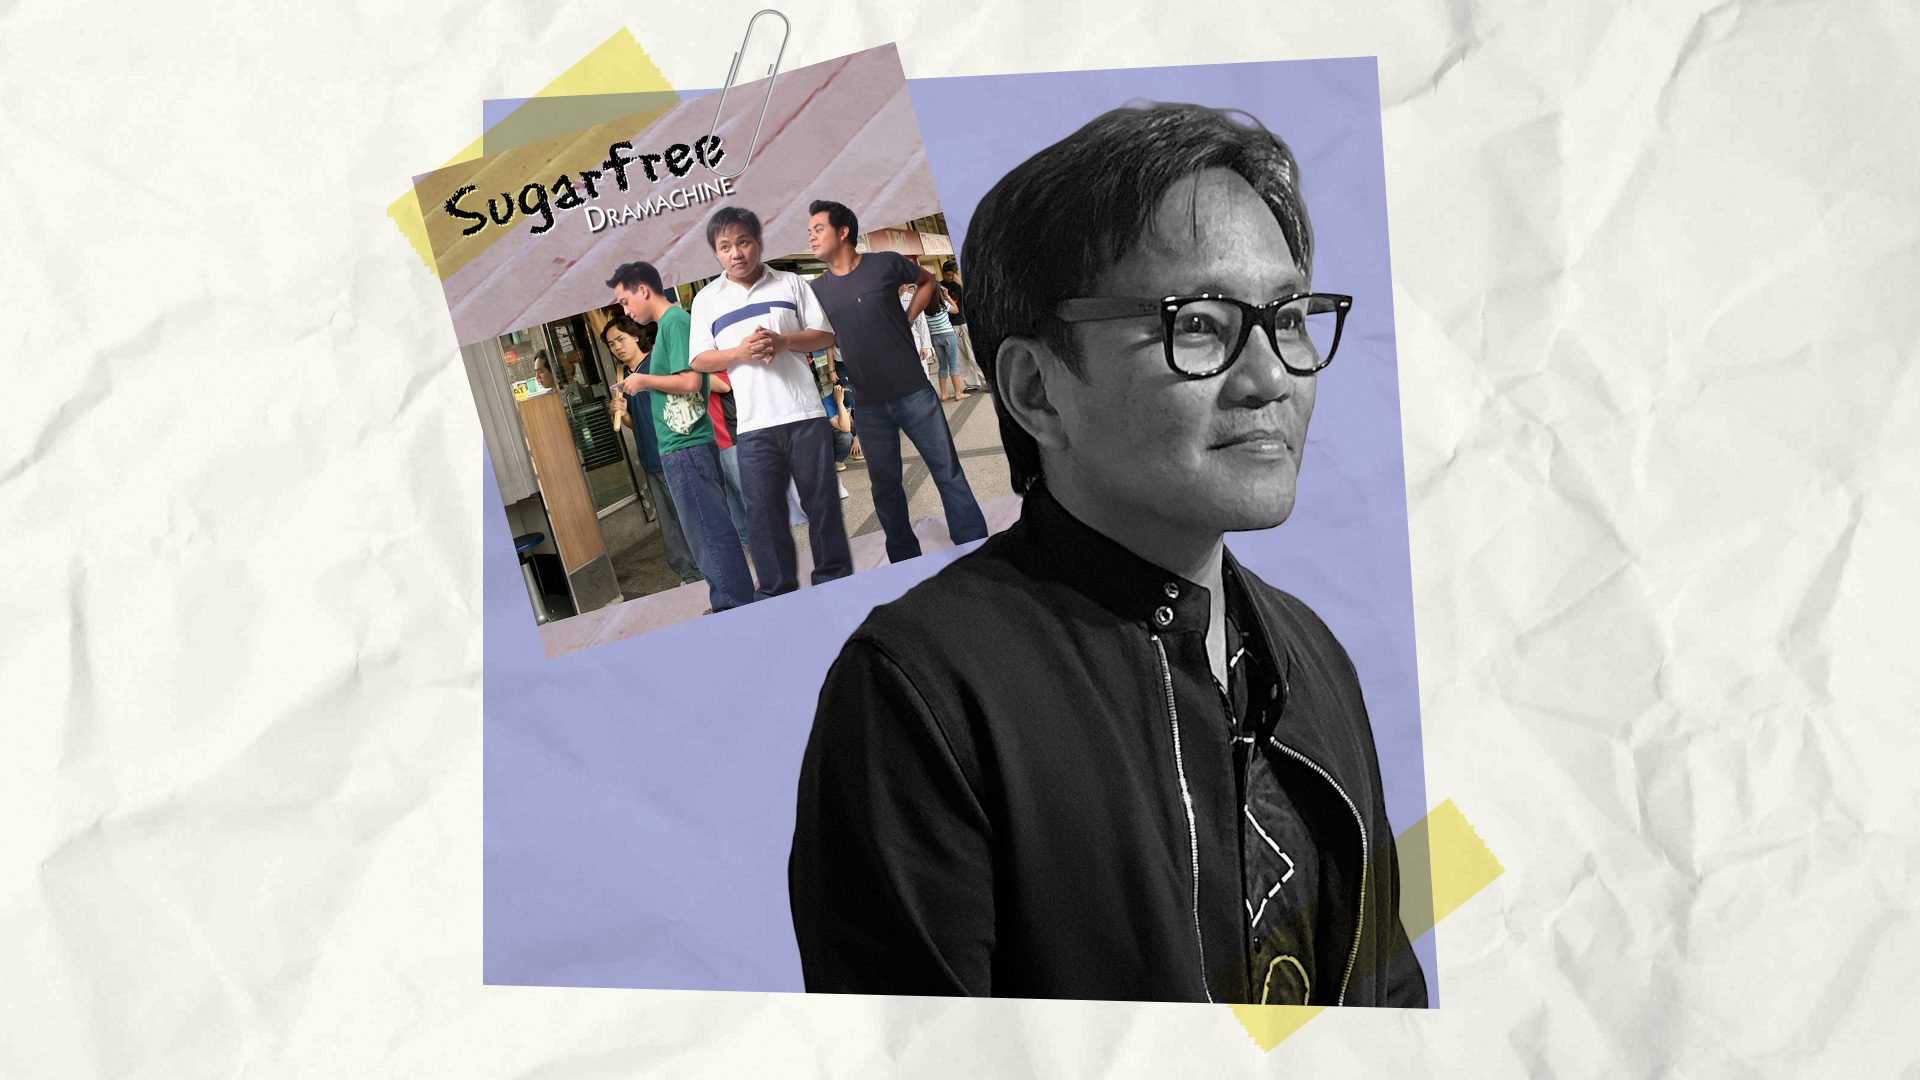 20 years later, Sugarfree’s ‘Dramachine’ is still the soundtrack of young Pinoys’ lives